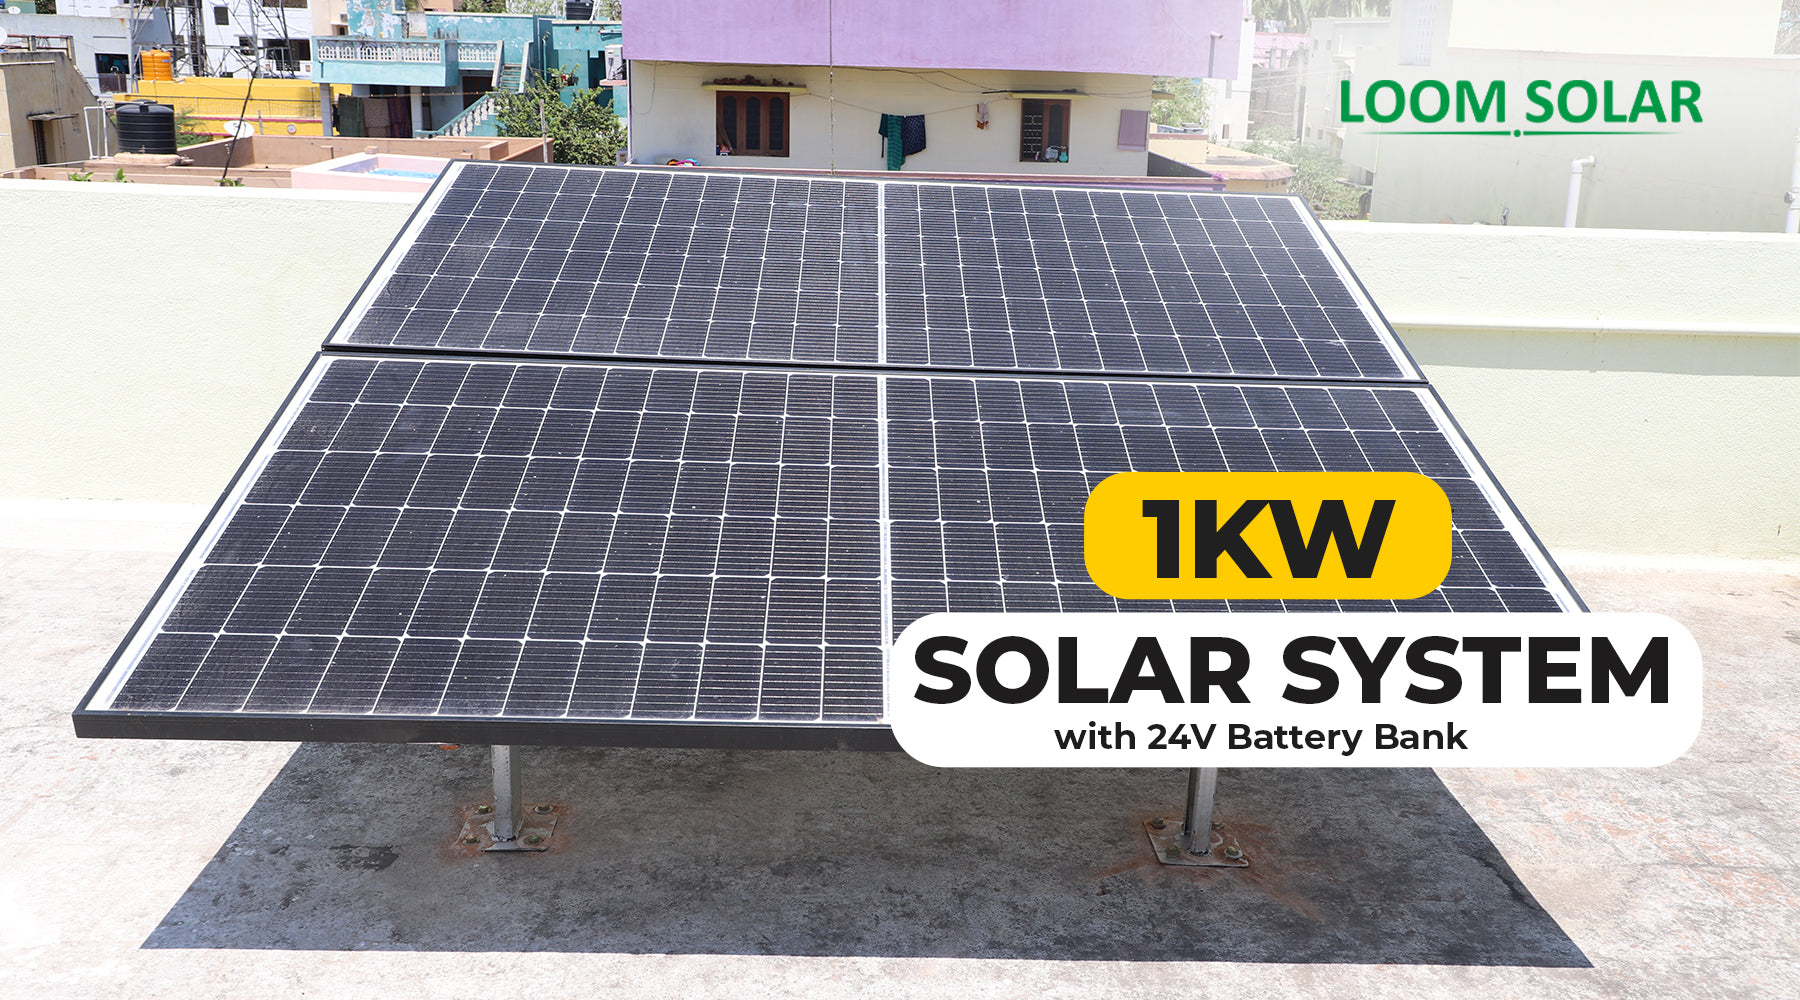 How much would an 1kW off grid solar system cost in India, 2022?